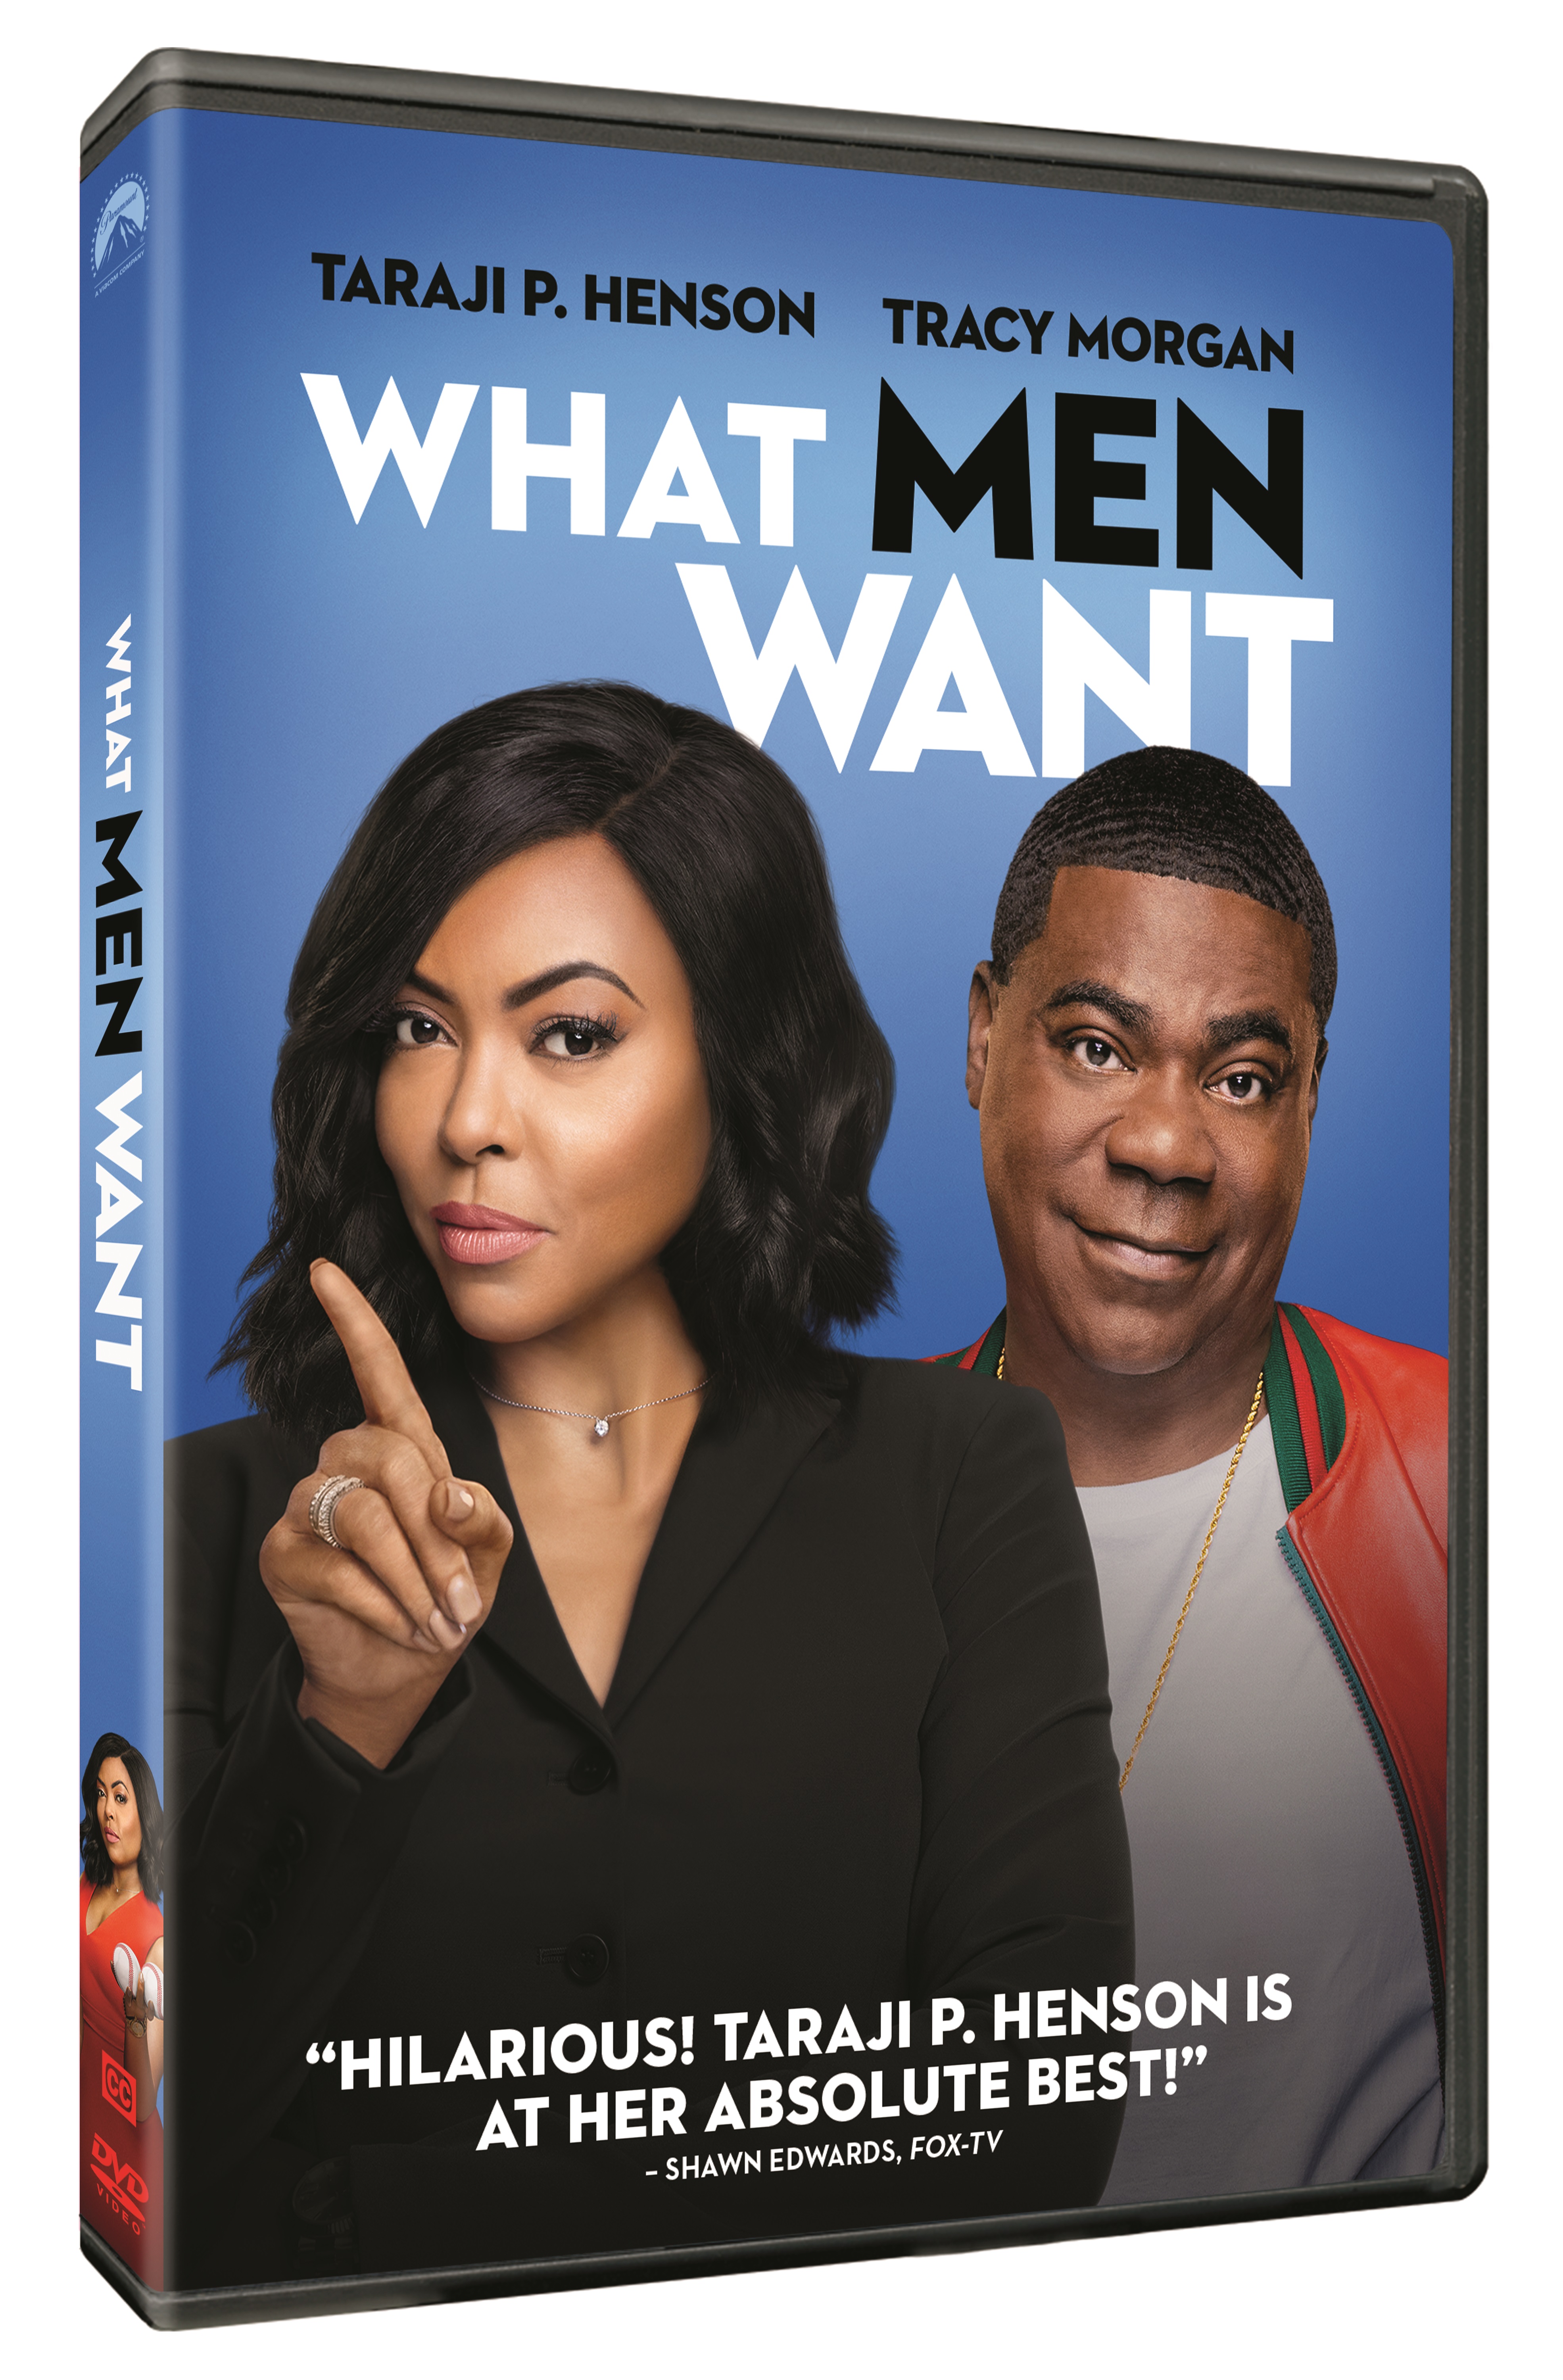 Paramount What Men Want (DVD) - image 2 of 2